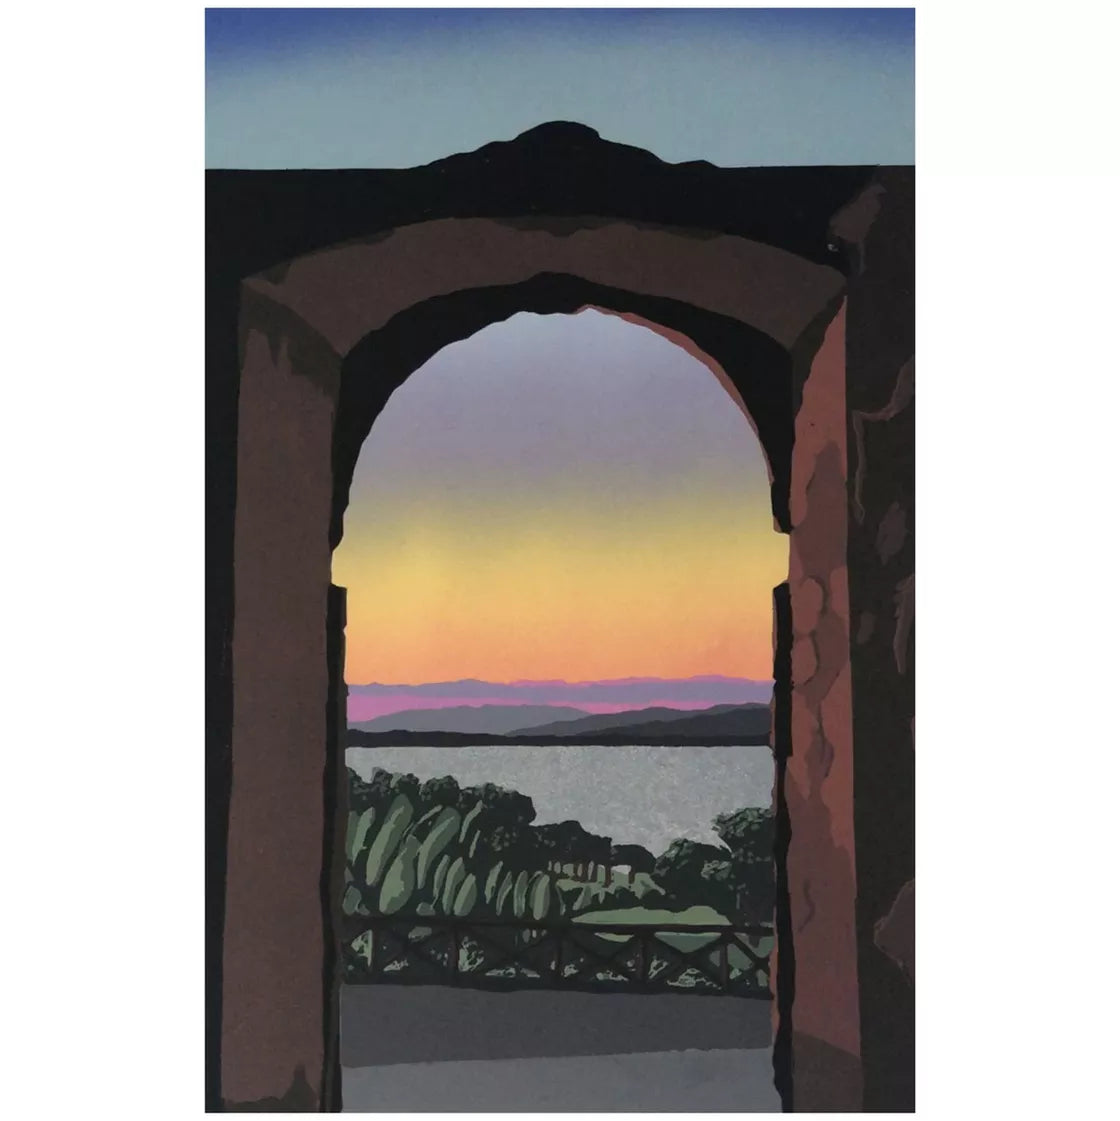 Sunset with arch and lake, Italy (2020) Linocut print from a limited edition of 8